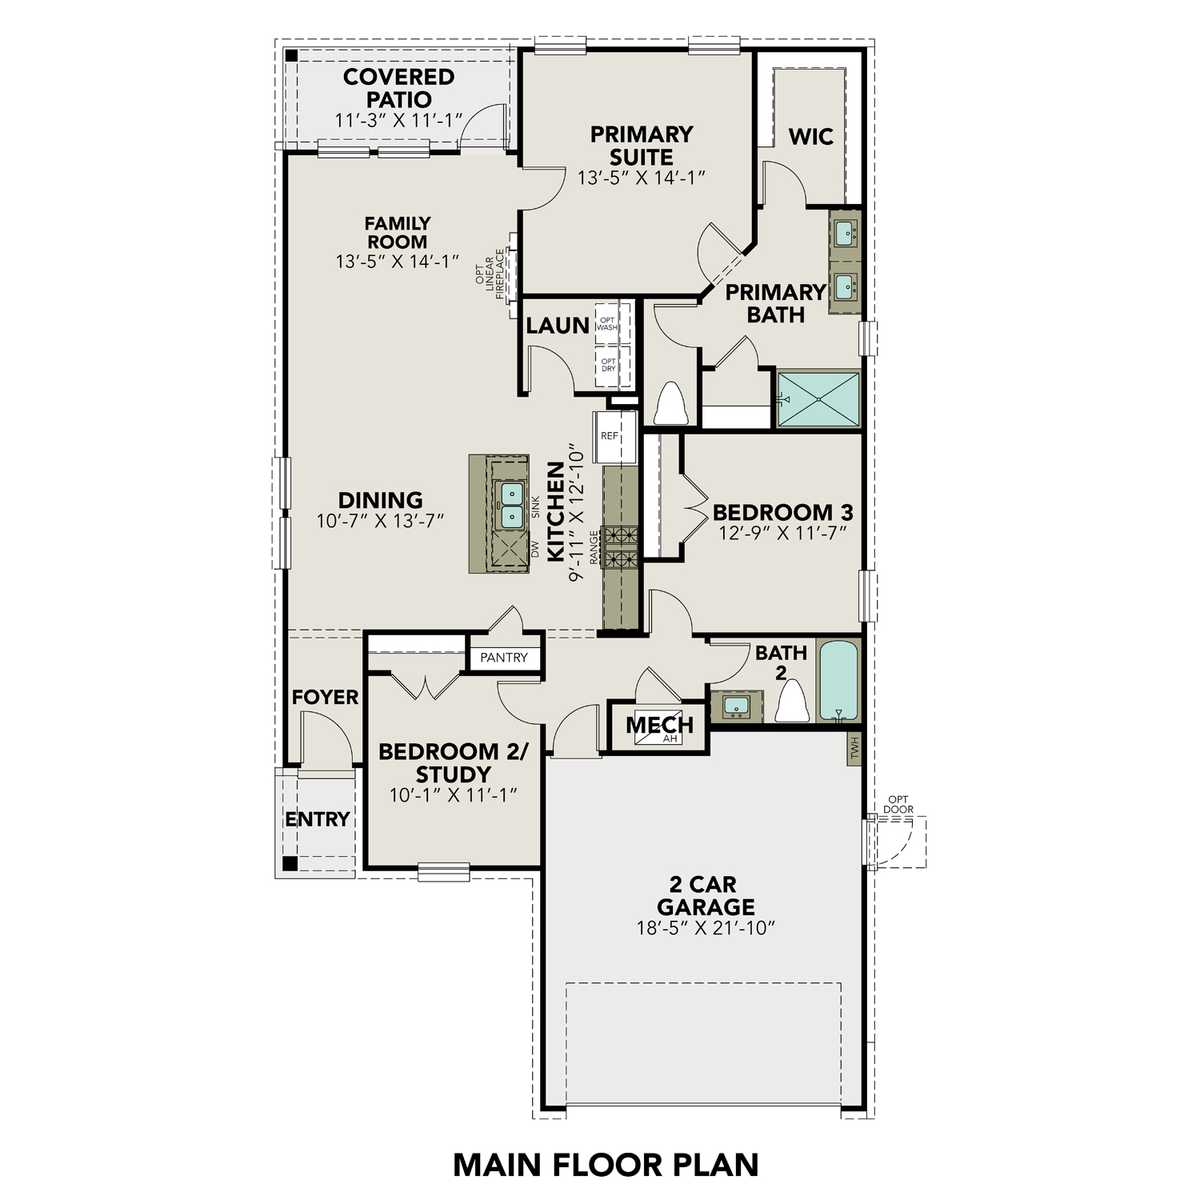 1 - The Costa C with 3-Car Garage floor plan layout for 39 Wichita Trail in Davidson Homes' River Ranch Meadows community.